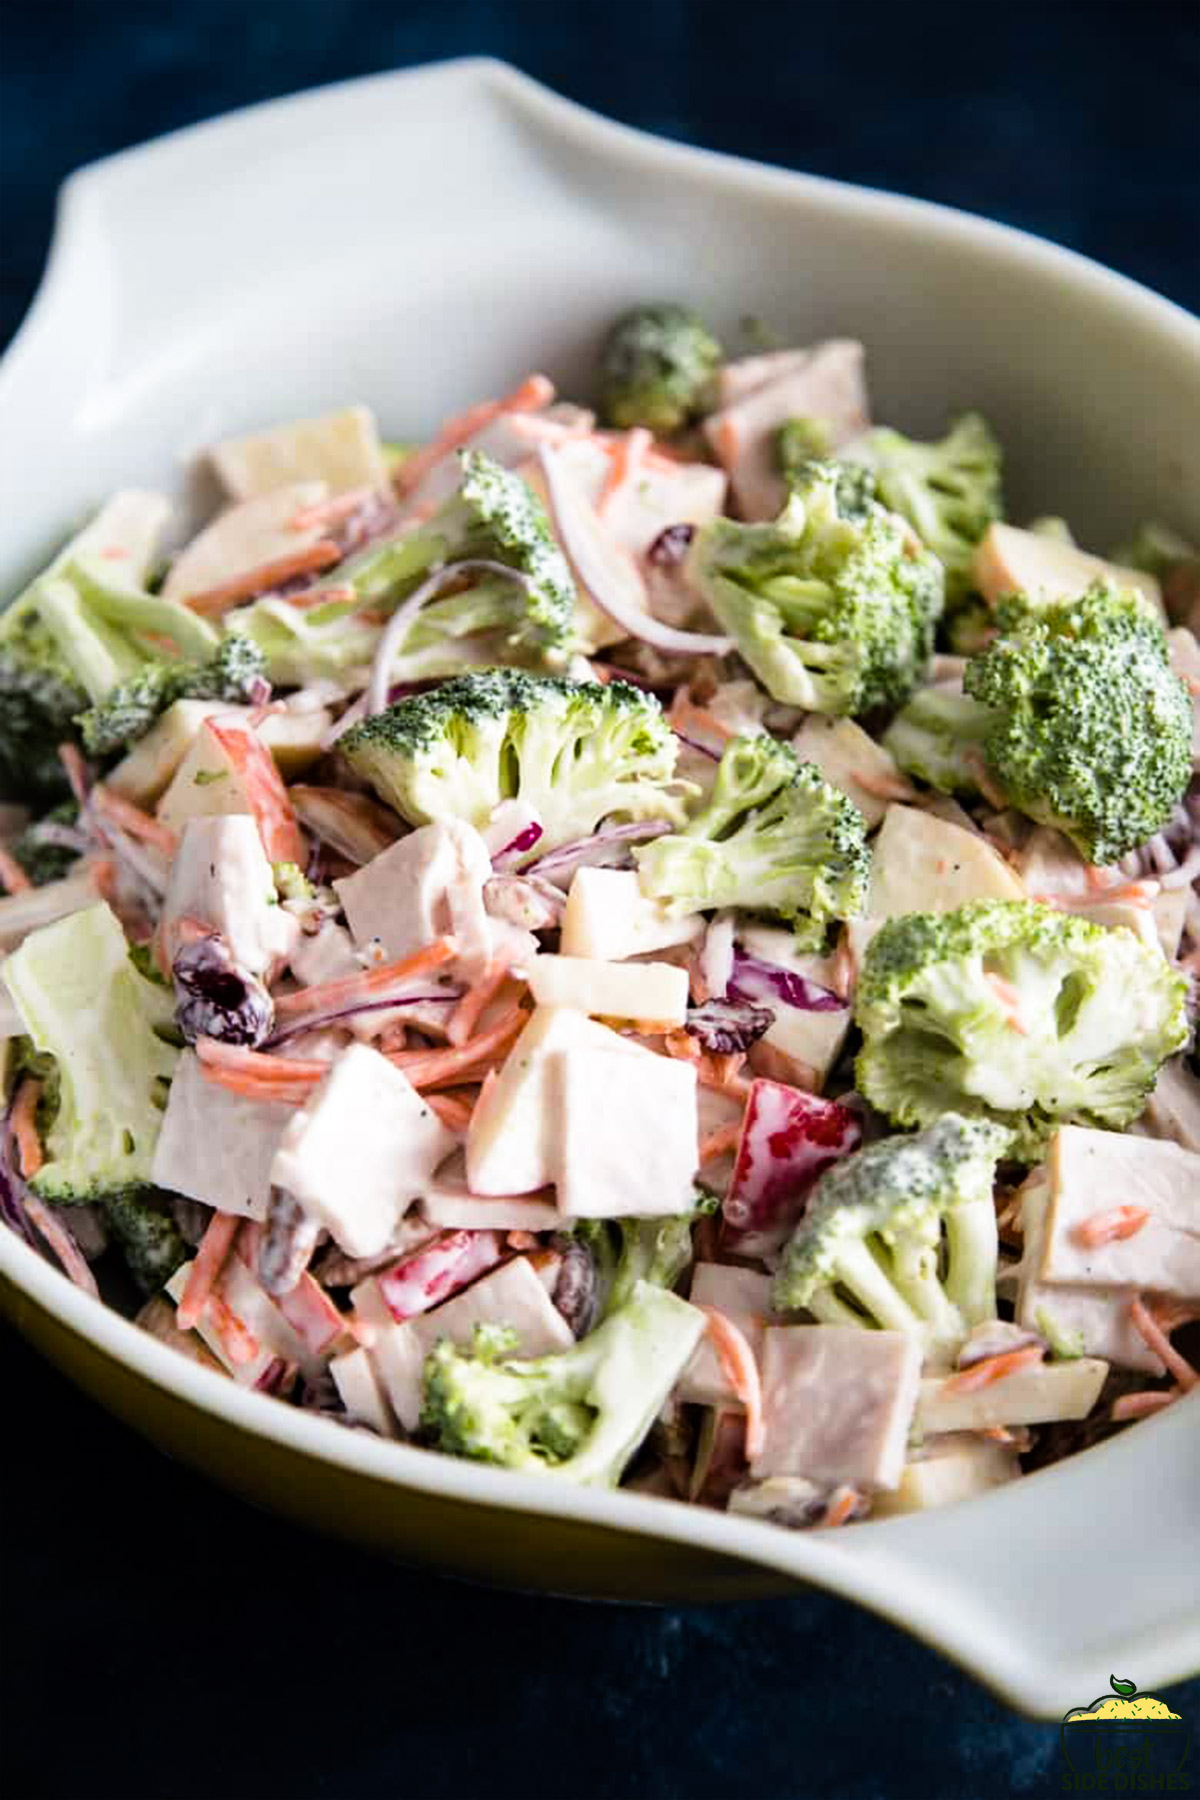 Broccoli salad with apples in a white mixing bowl